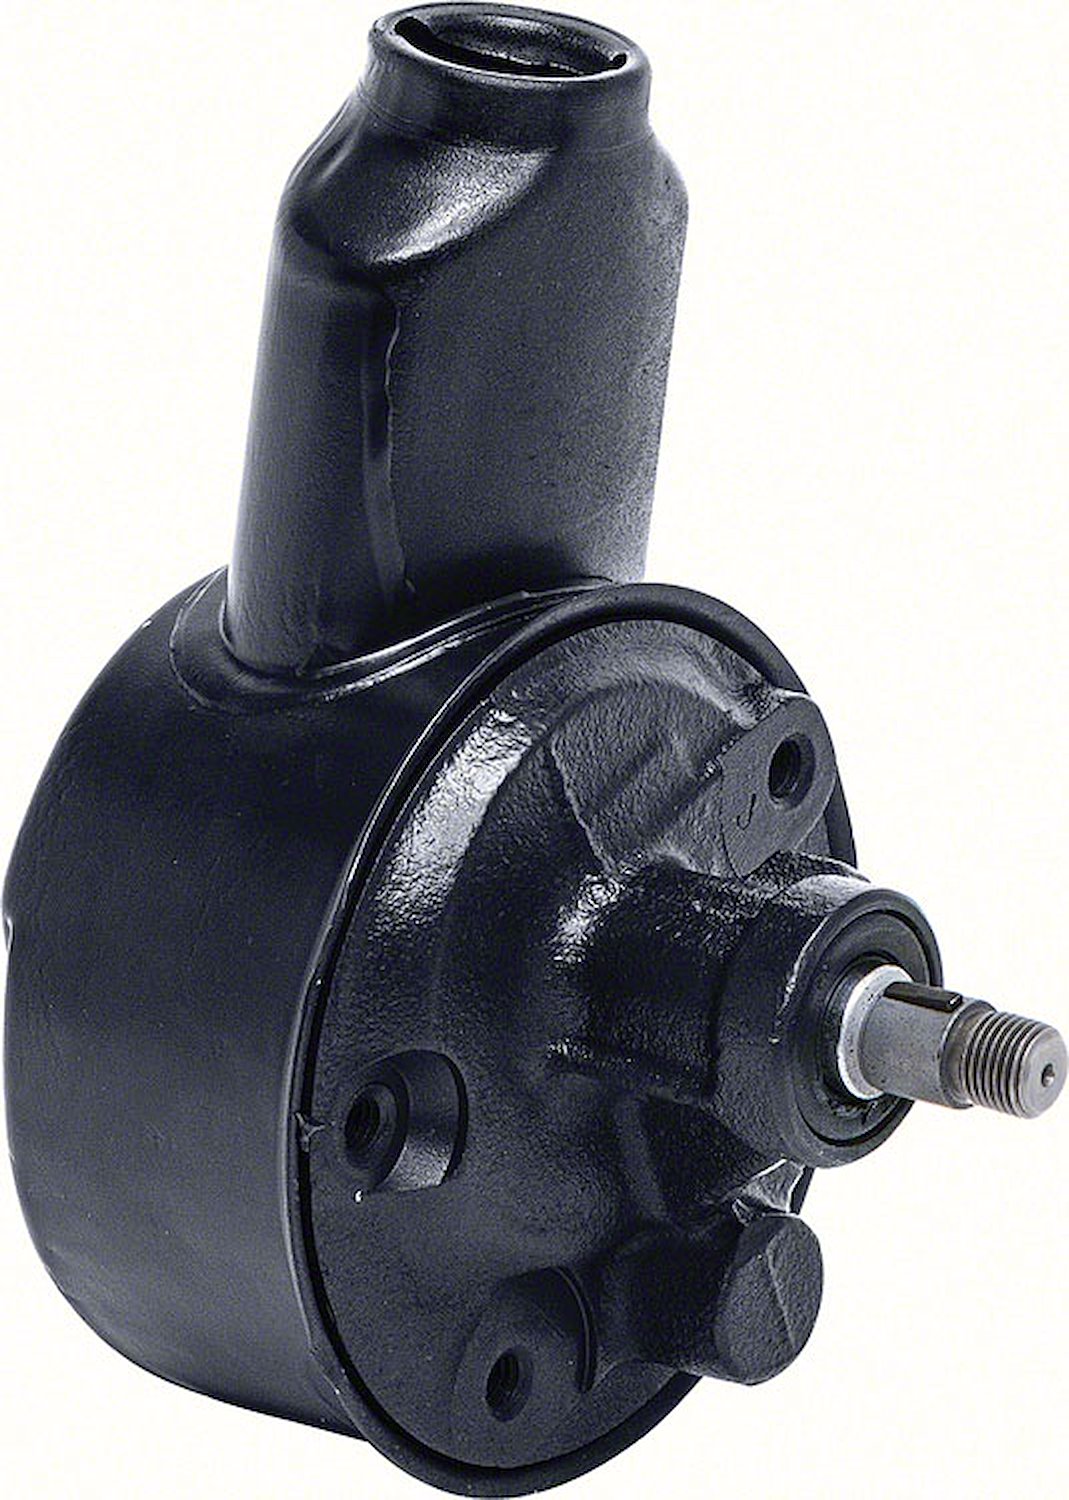 A7018 Remanufactured Power Steering Pump With "Banjo Stype" Reservoir 1973-74